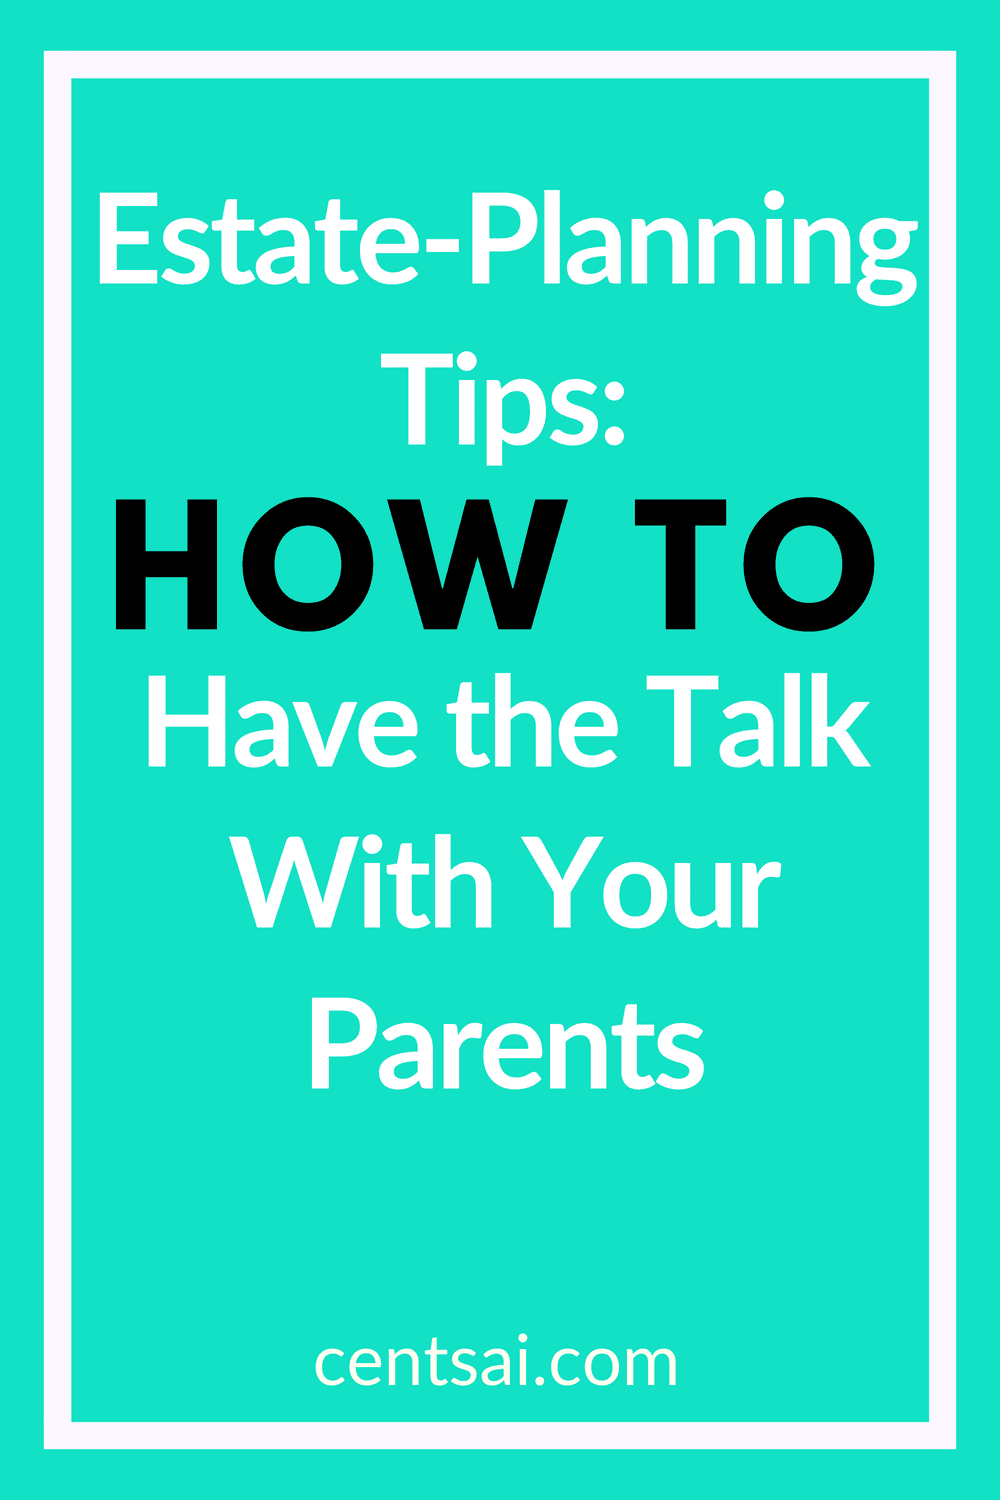 Estate-Planning Tips: How to Have the Talk With Your Parents. Are you ready to deal with your parents' wills or debt after they die? It may sound morbid, but it's crucial to plan. Check out these estate-planning checklist and tips. #estateplanningchecklist #estateplanning #estateplanningtips